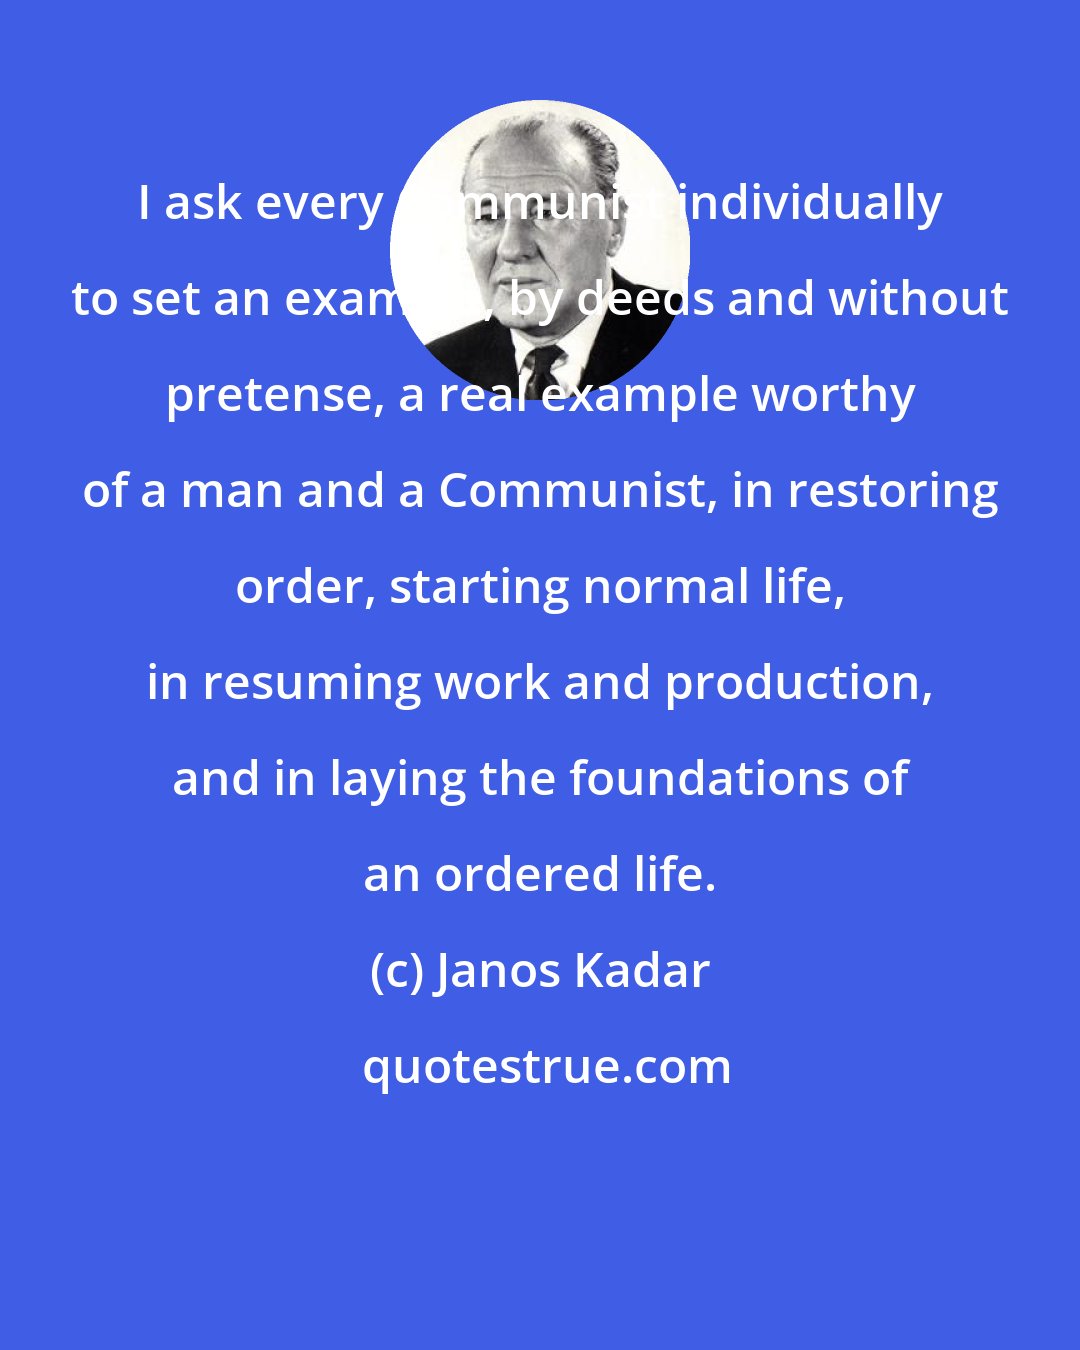 Janos Kadar: I ask every Communist individually to set an example, by deeds and without pretense, a real example worthy of a man and a Communist, in restoring order, starting normal life, in resuming work and production, and in laying the foundations of an ordered life.